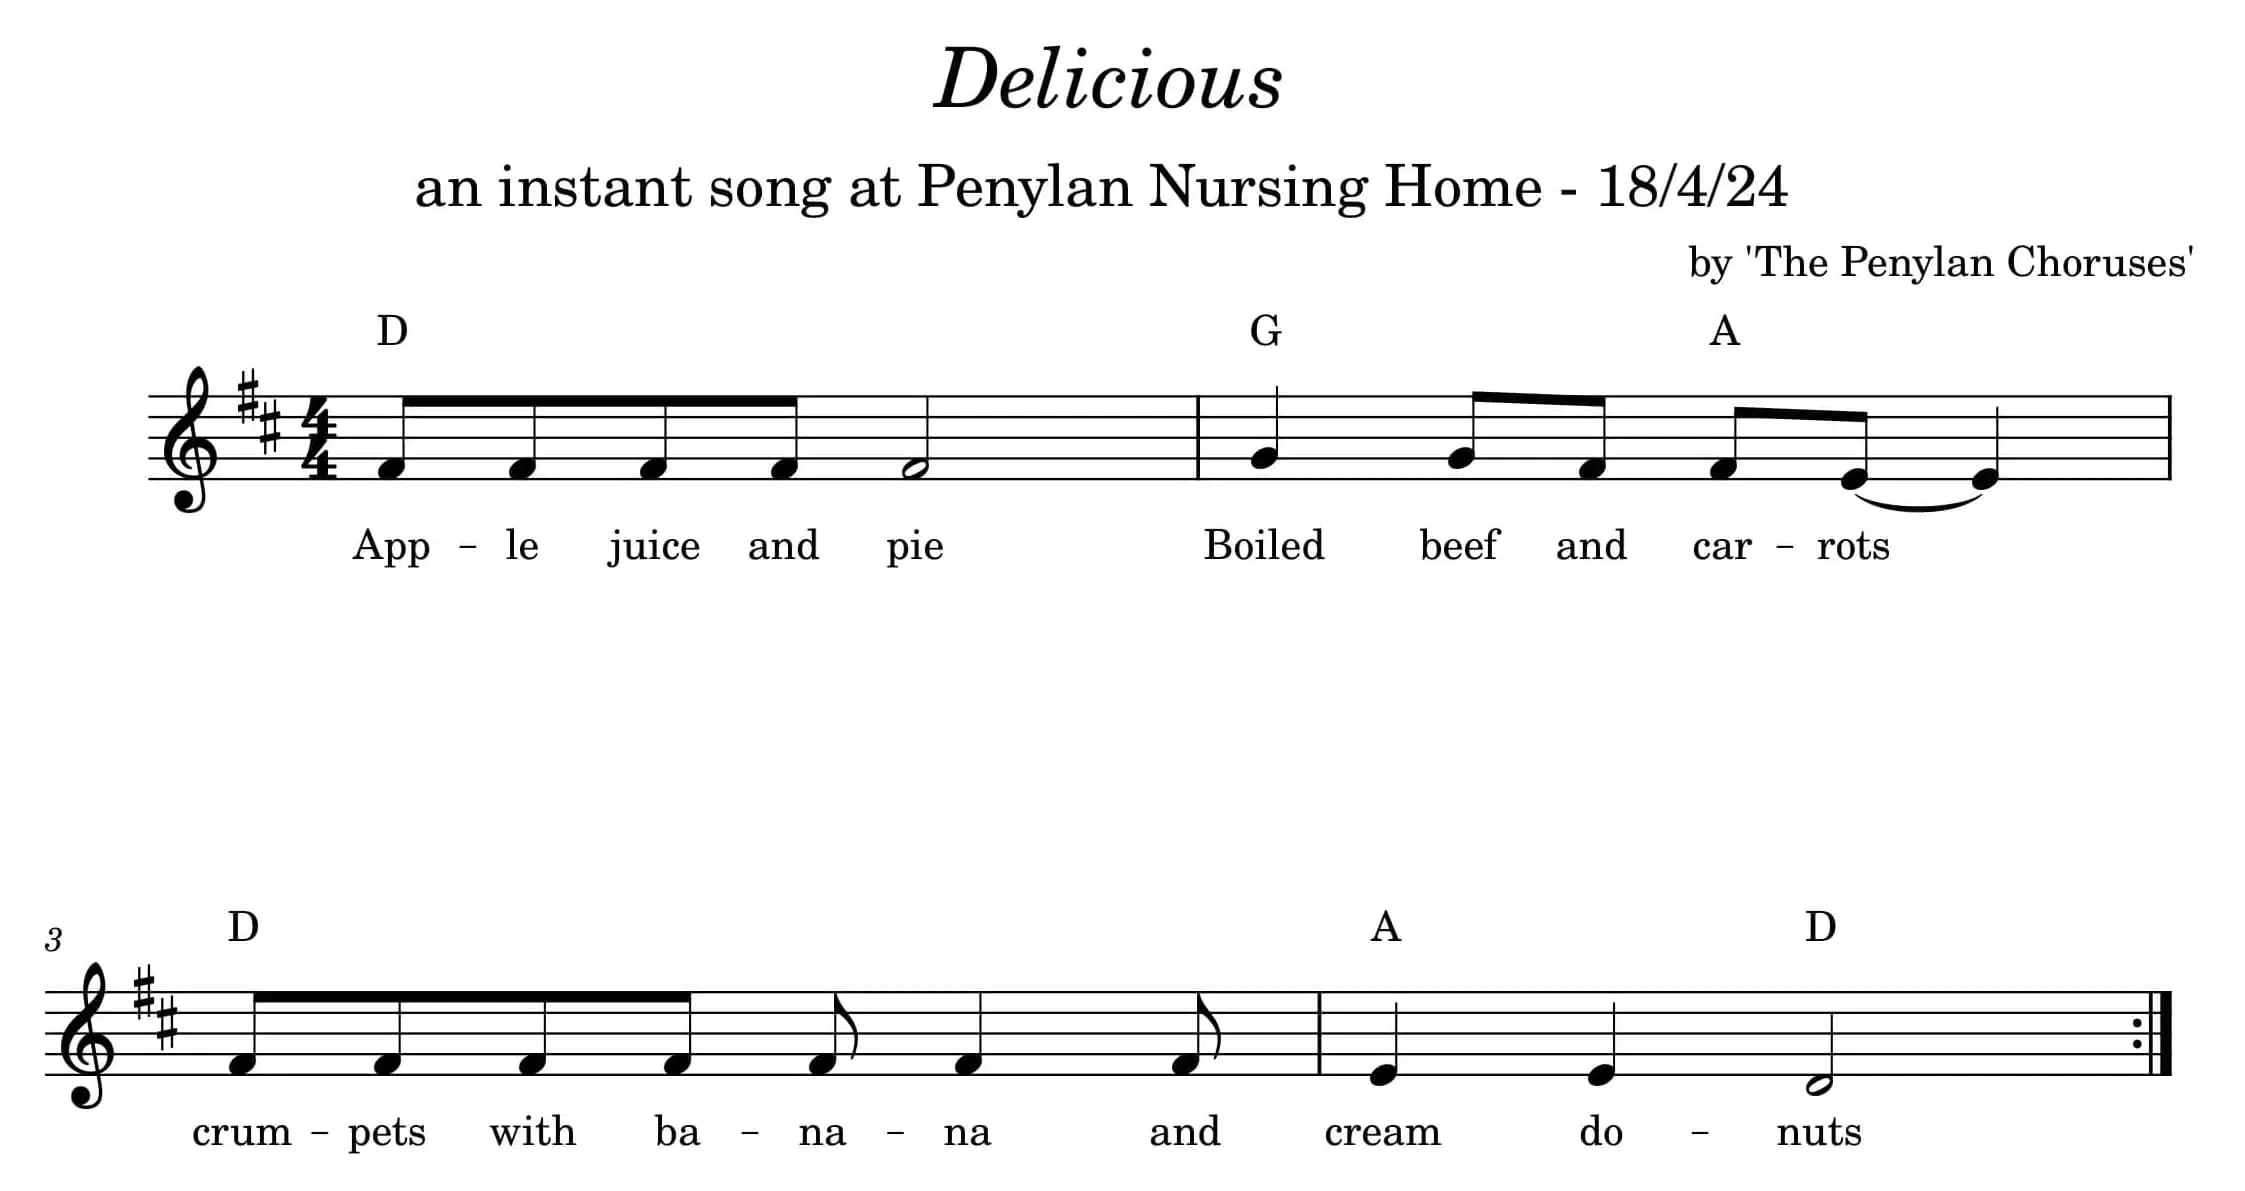 Manuscript of instant song: "Delicious"